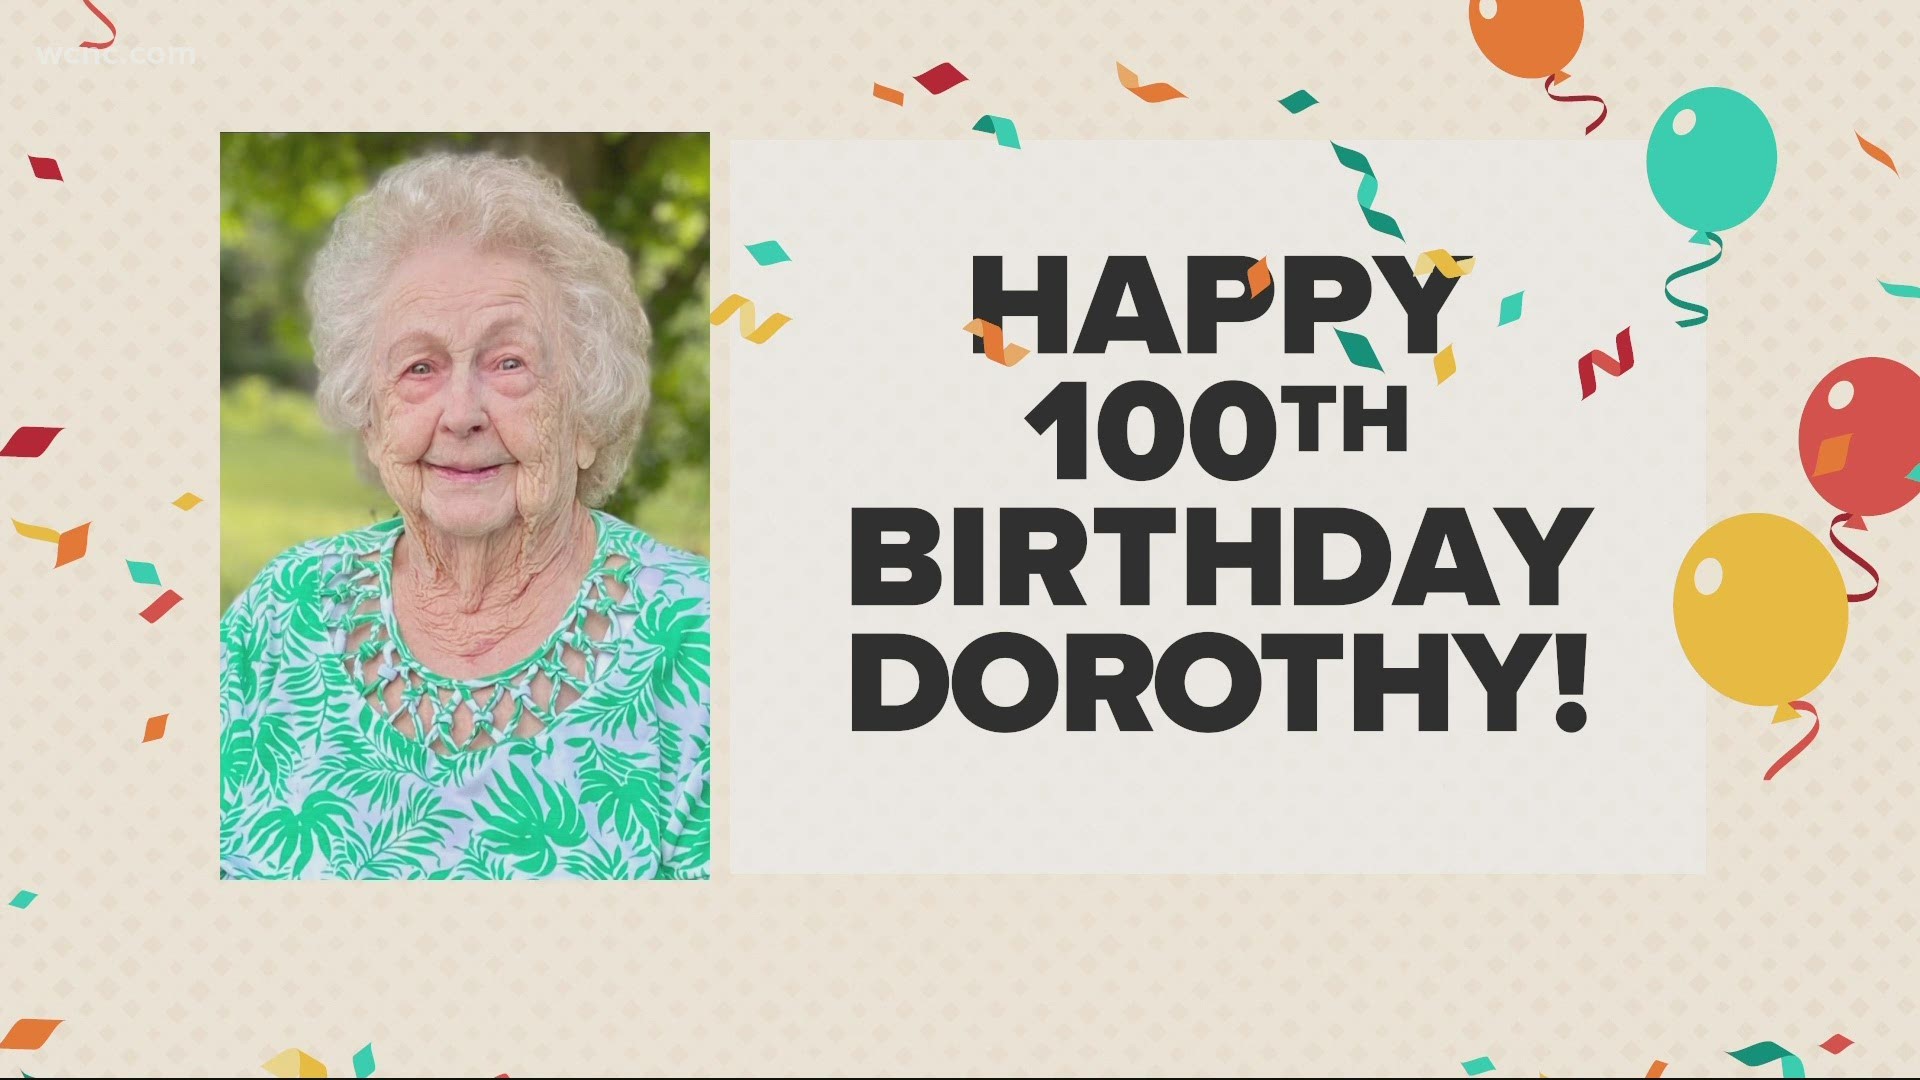 Dorothy Bennett Bishop moved from Mount Airy to York, South Carolina, to be closer with family. On Tuesday, she'll celebrate her 100th birthday!